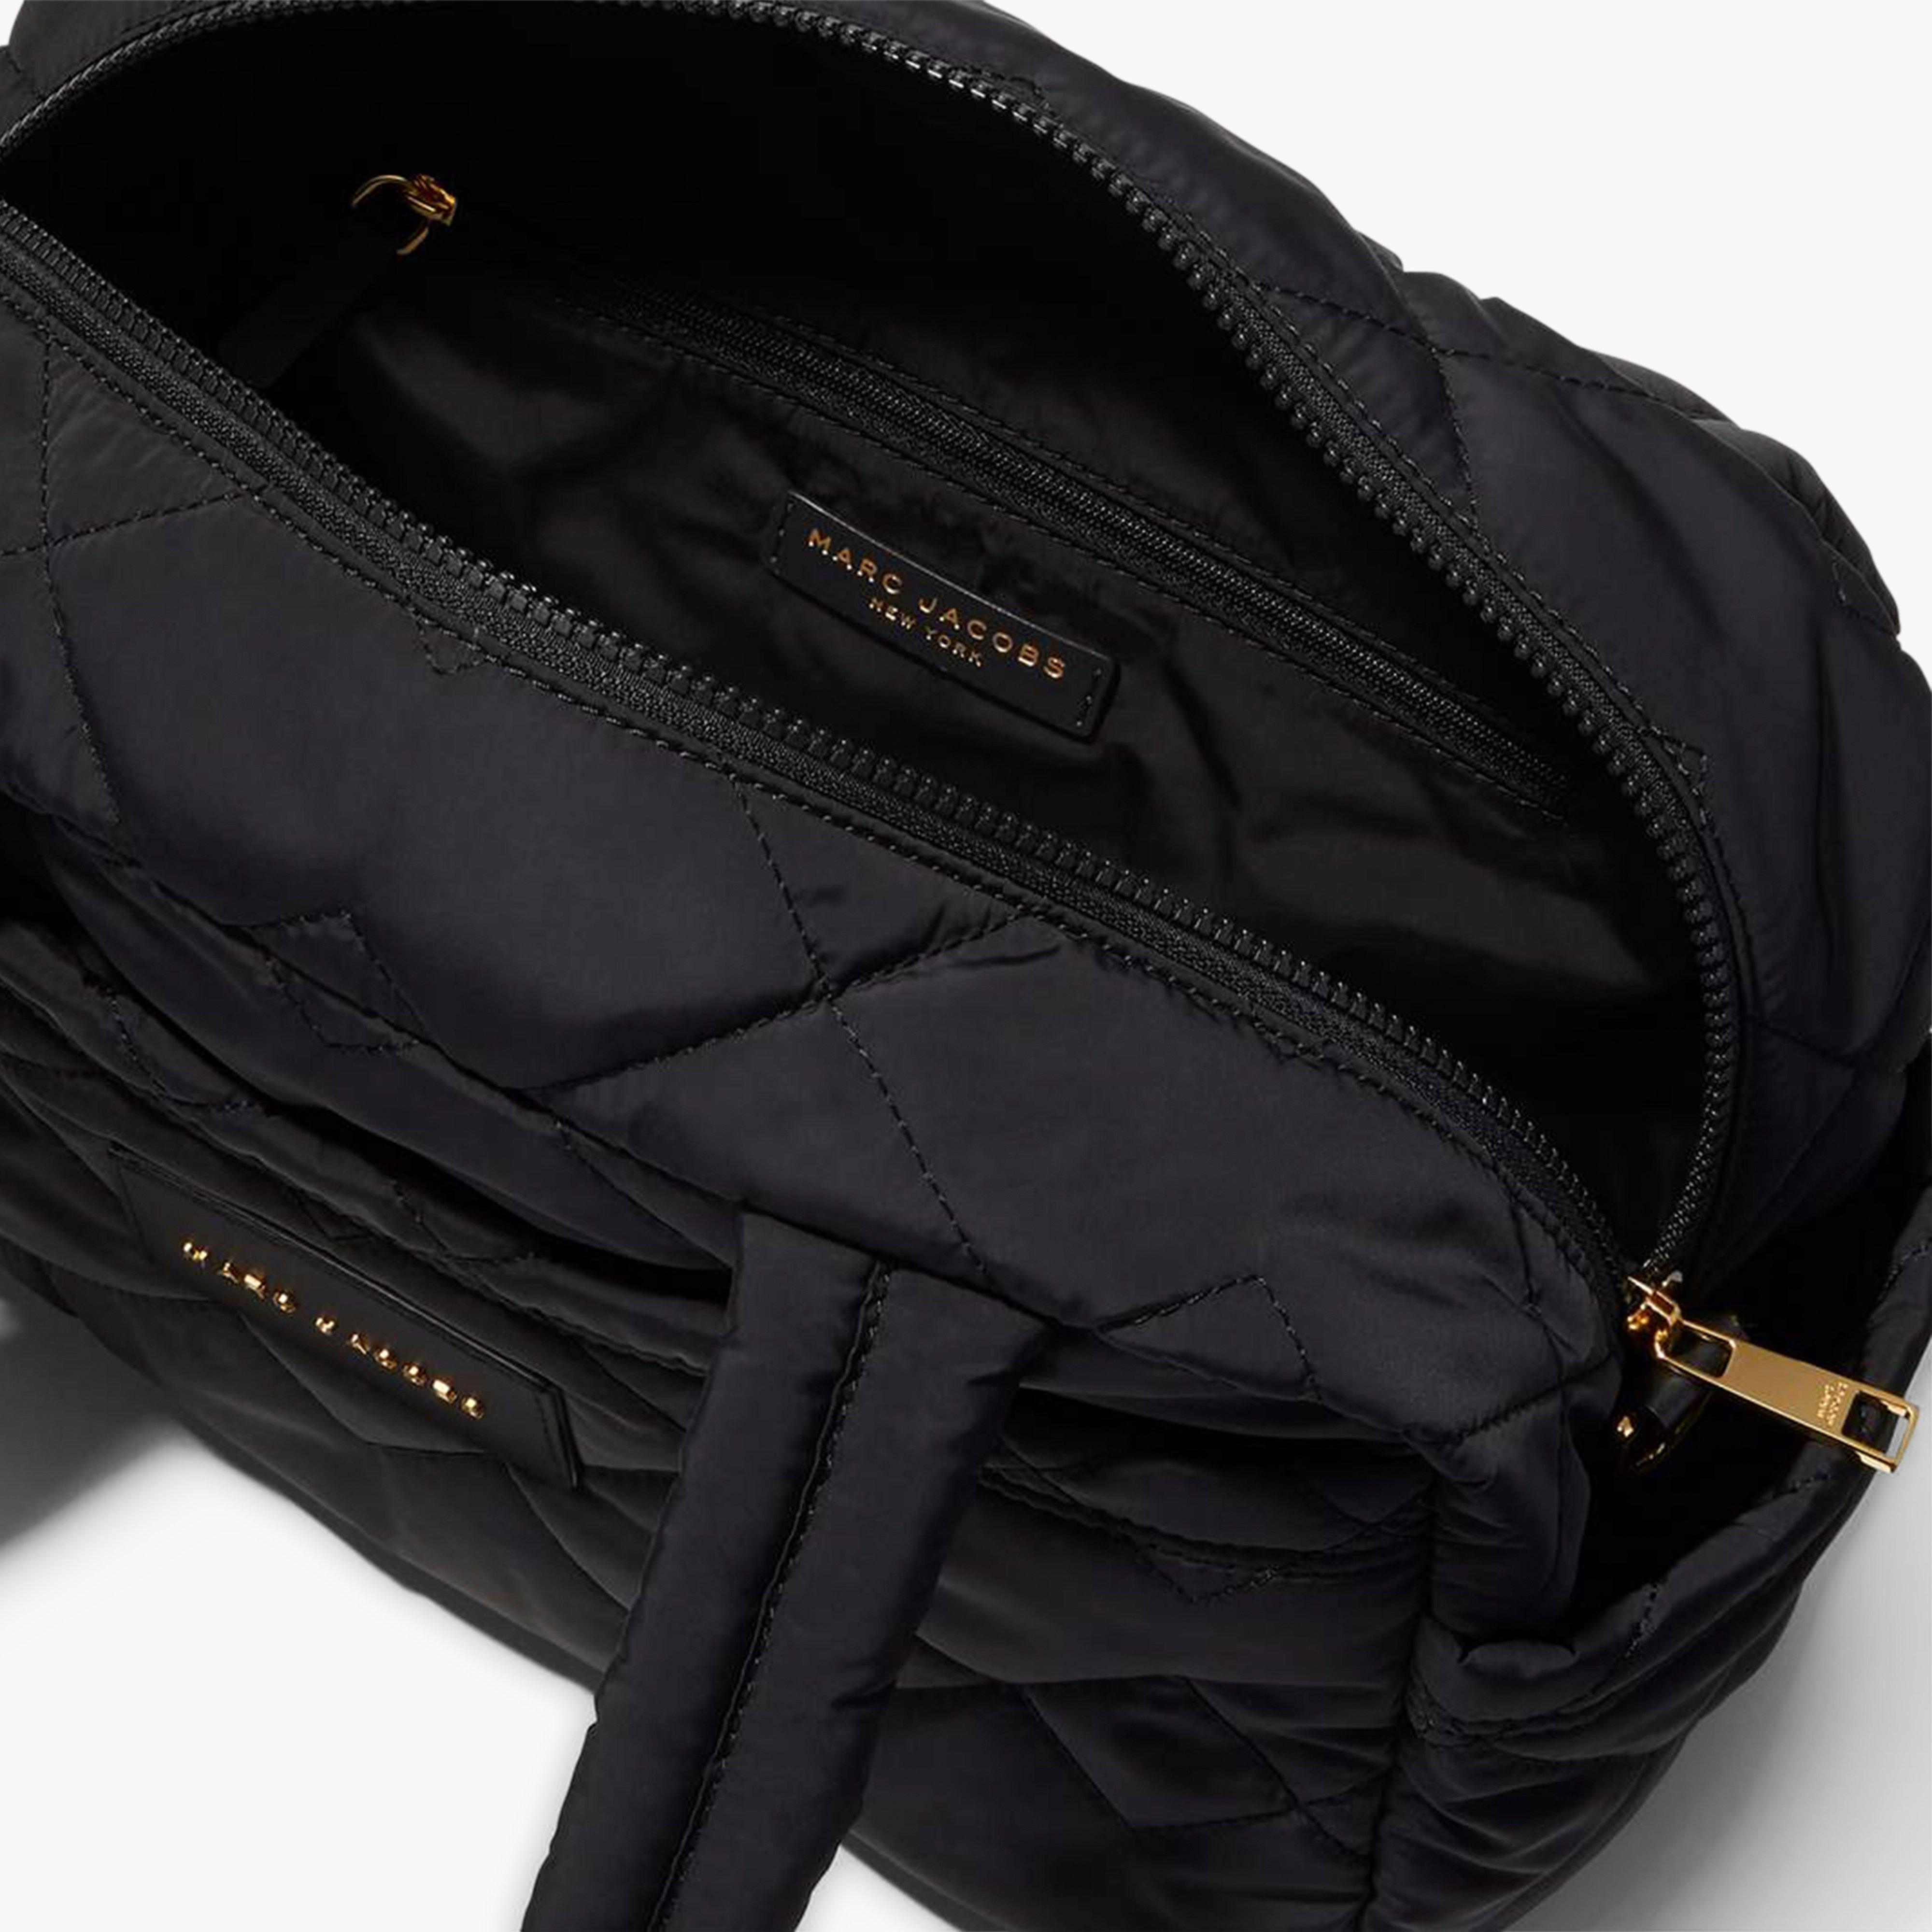 Marc Jacobs Synthetic Small Weekender in Black | Lyst